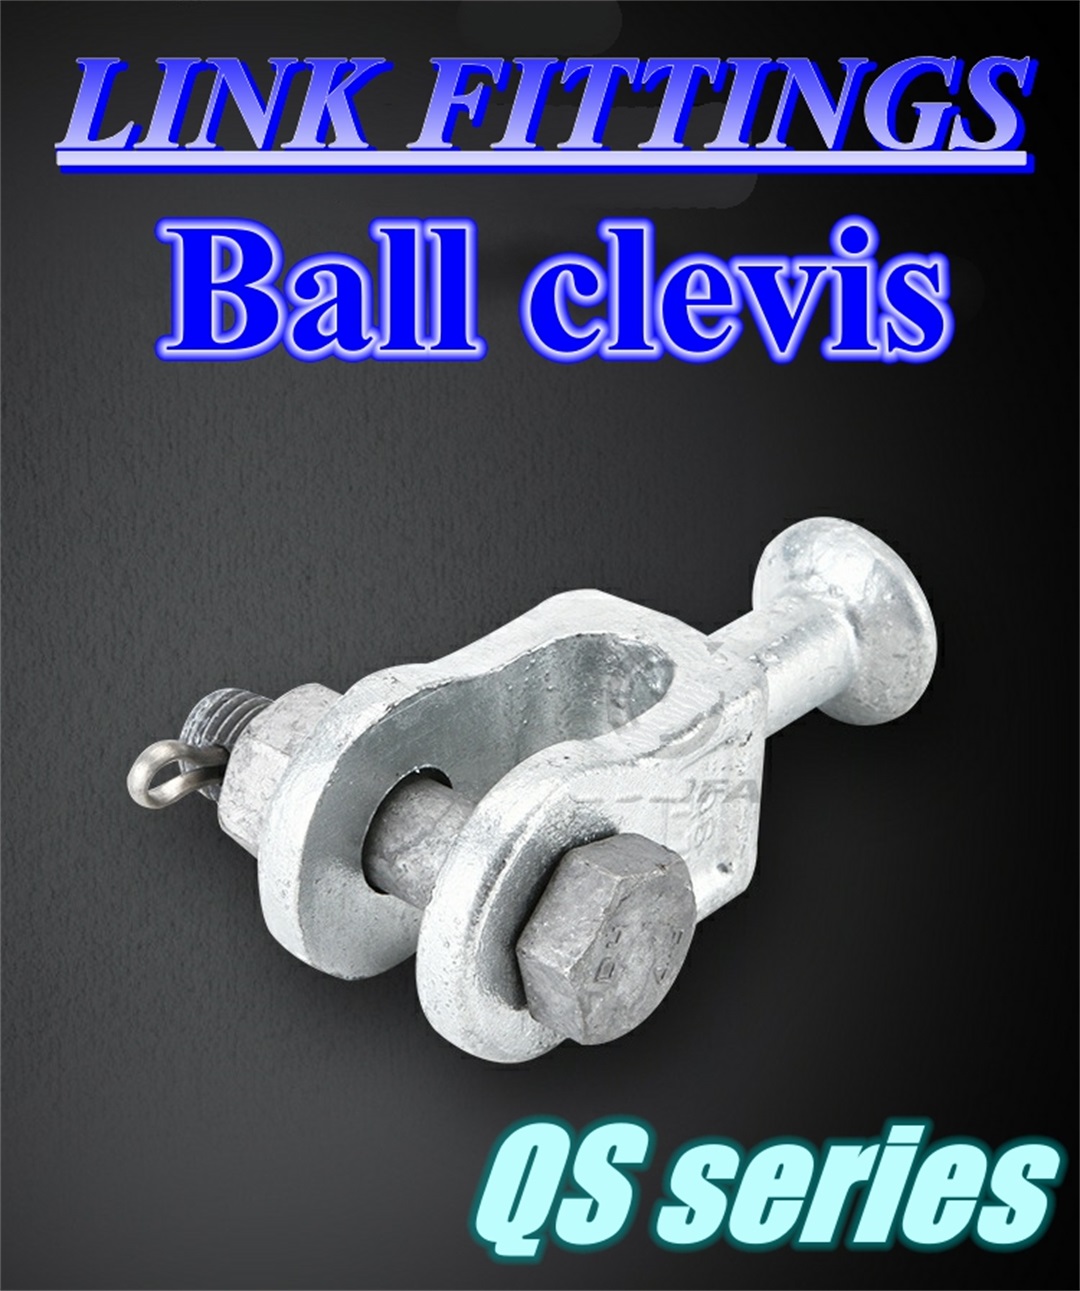 Ball clevis link fitting